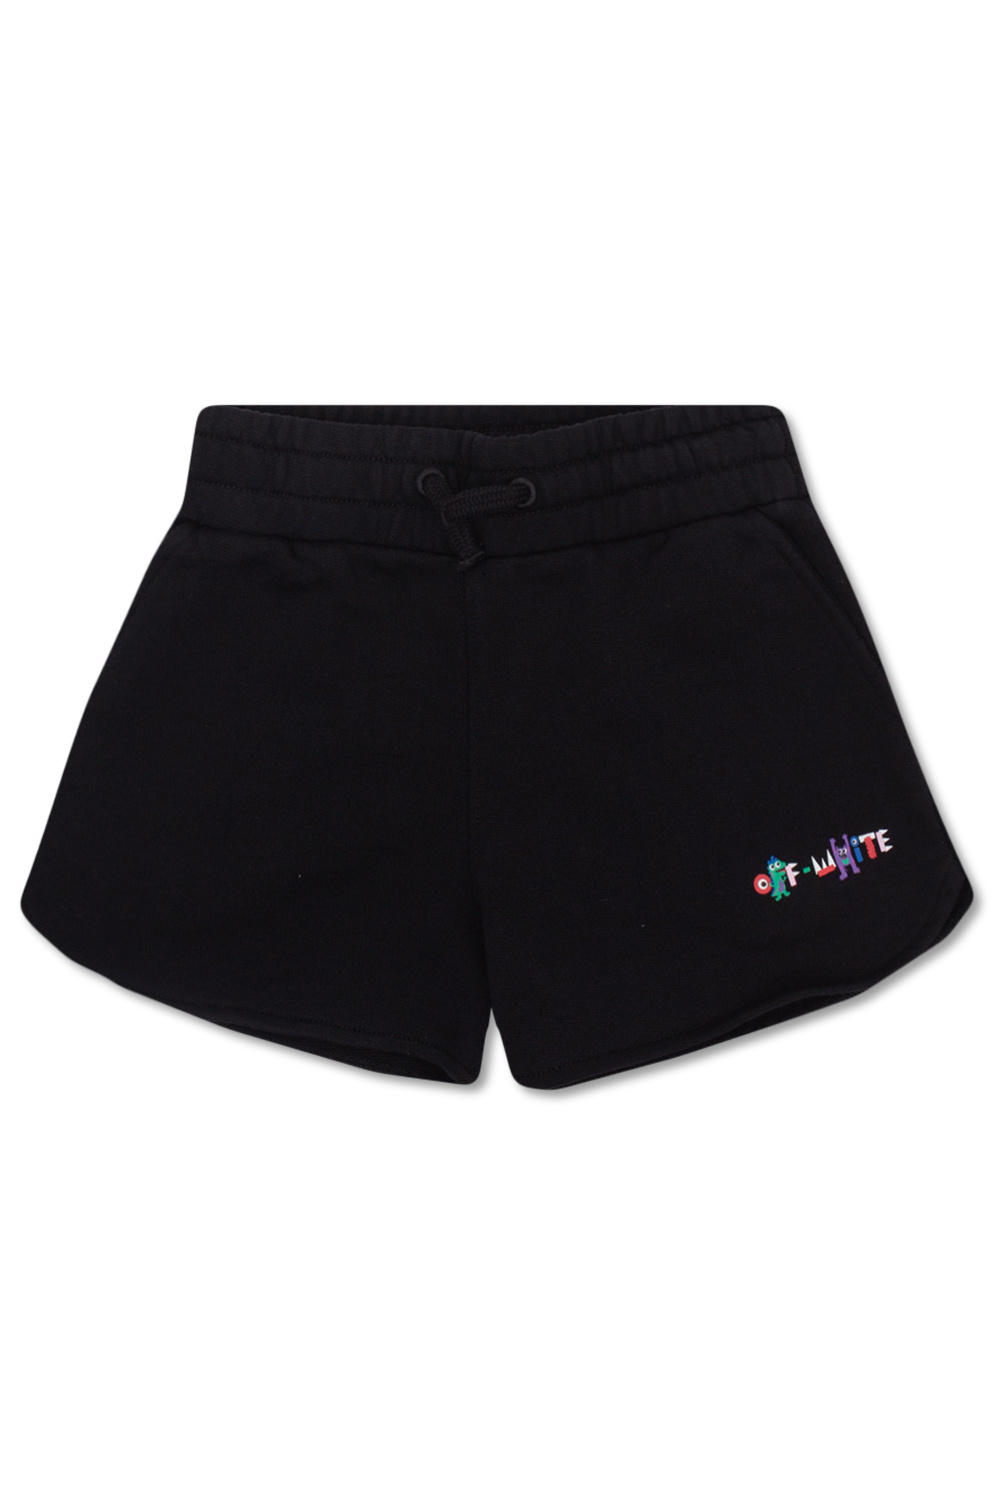 Off-White Kids Printed Dolce shorts